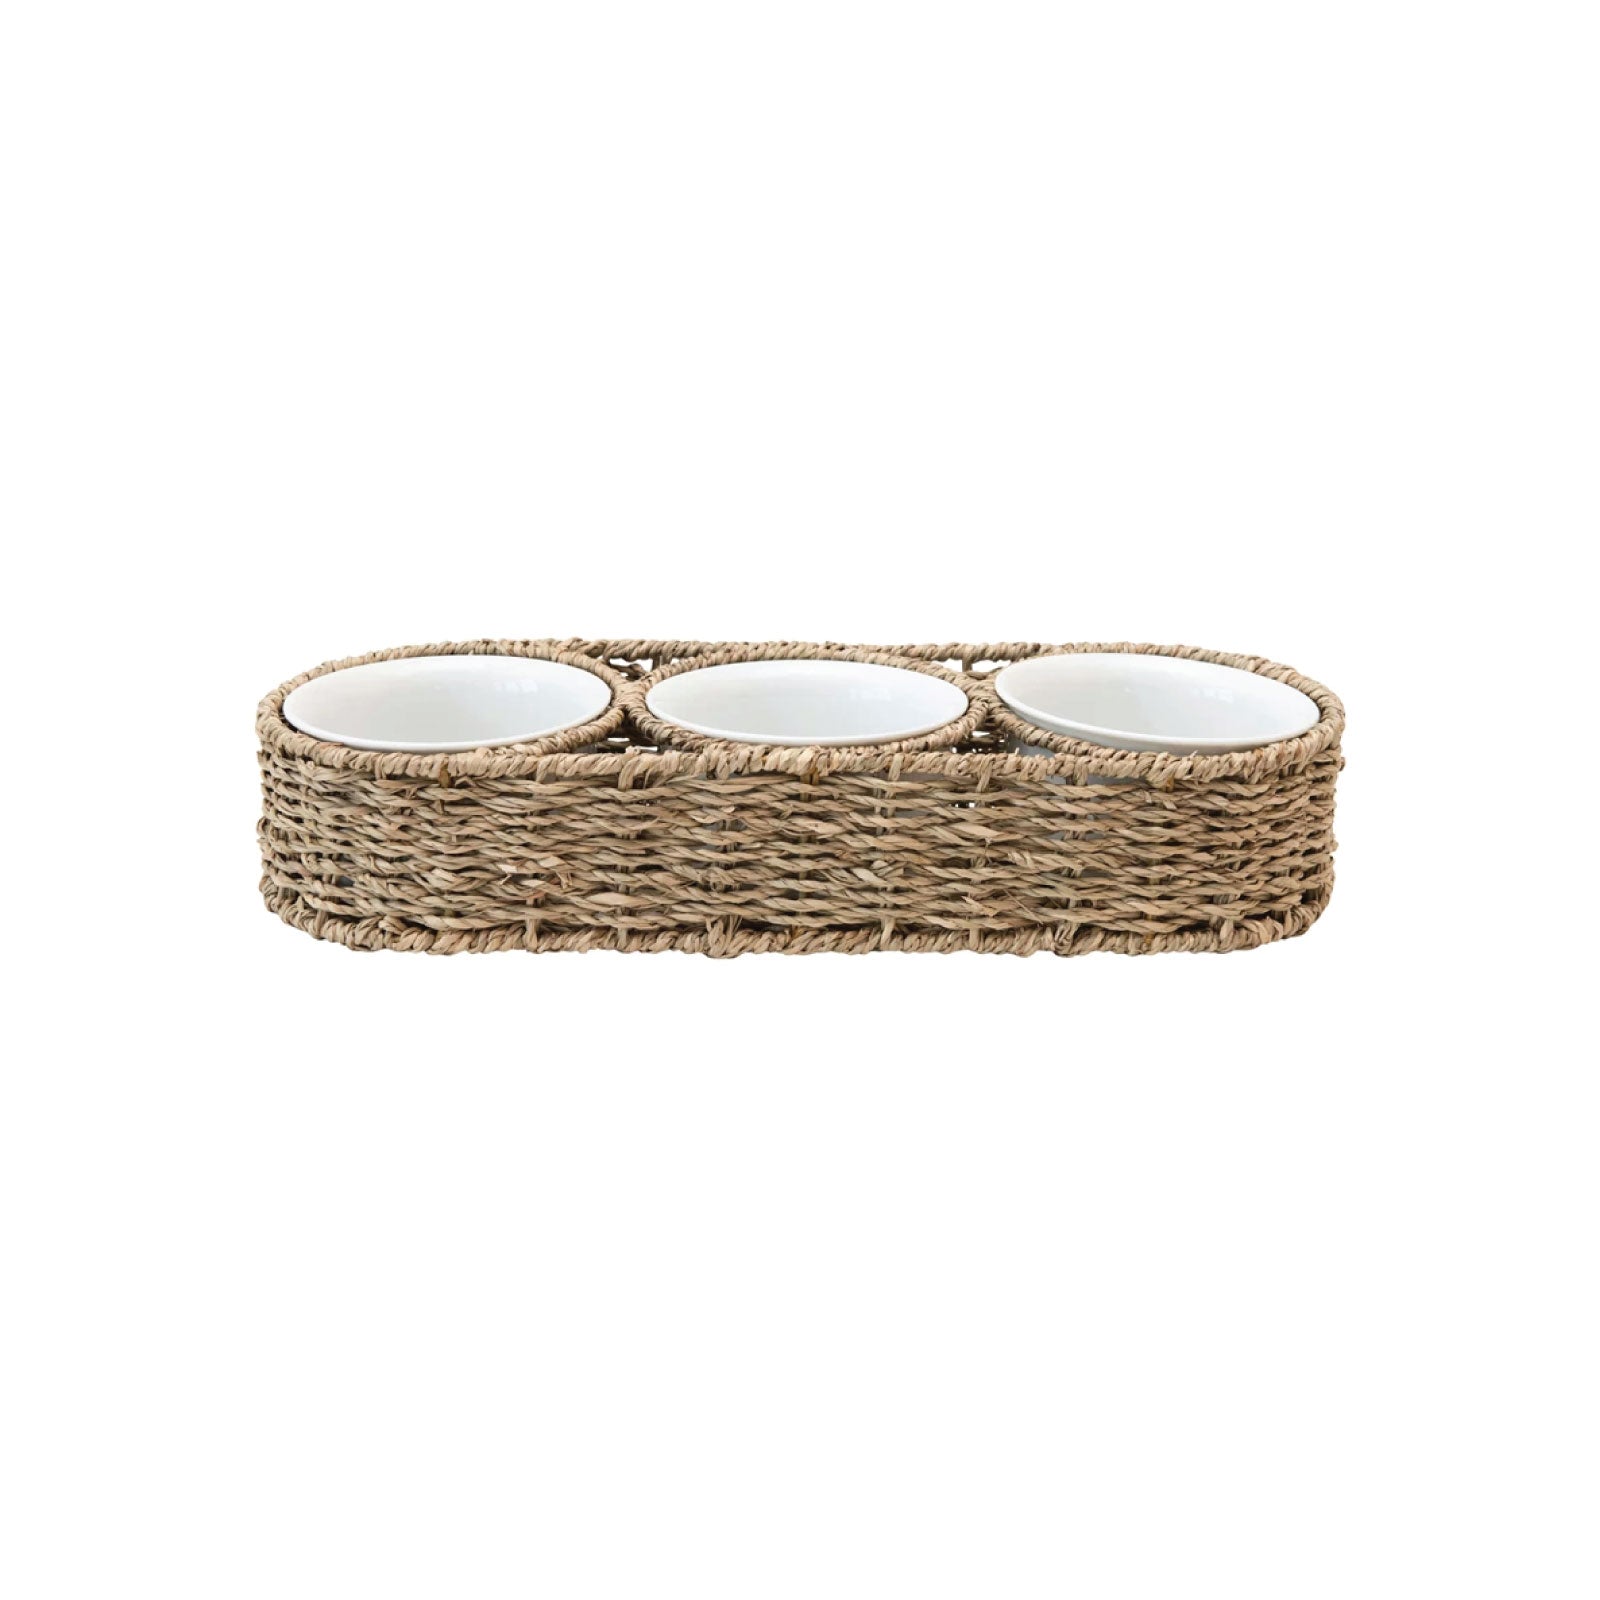 Seagrass Basket with Serving Bowls